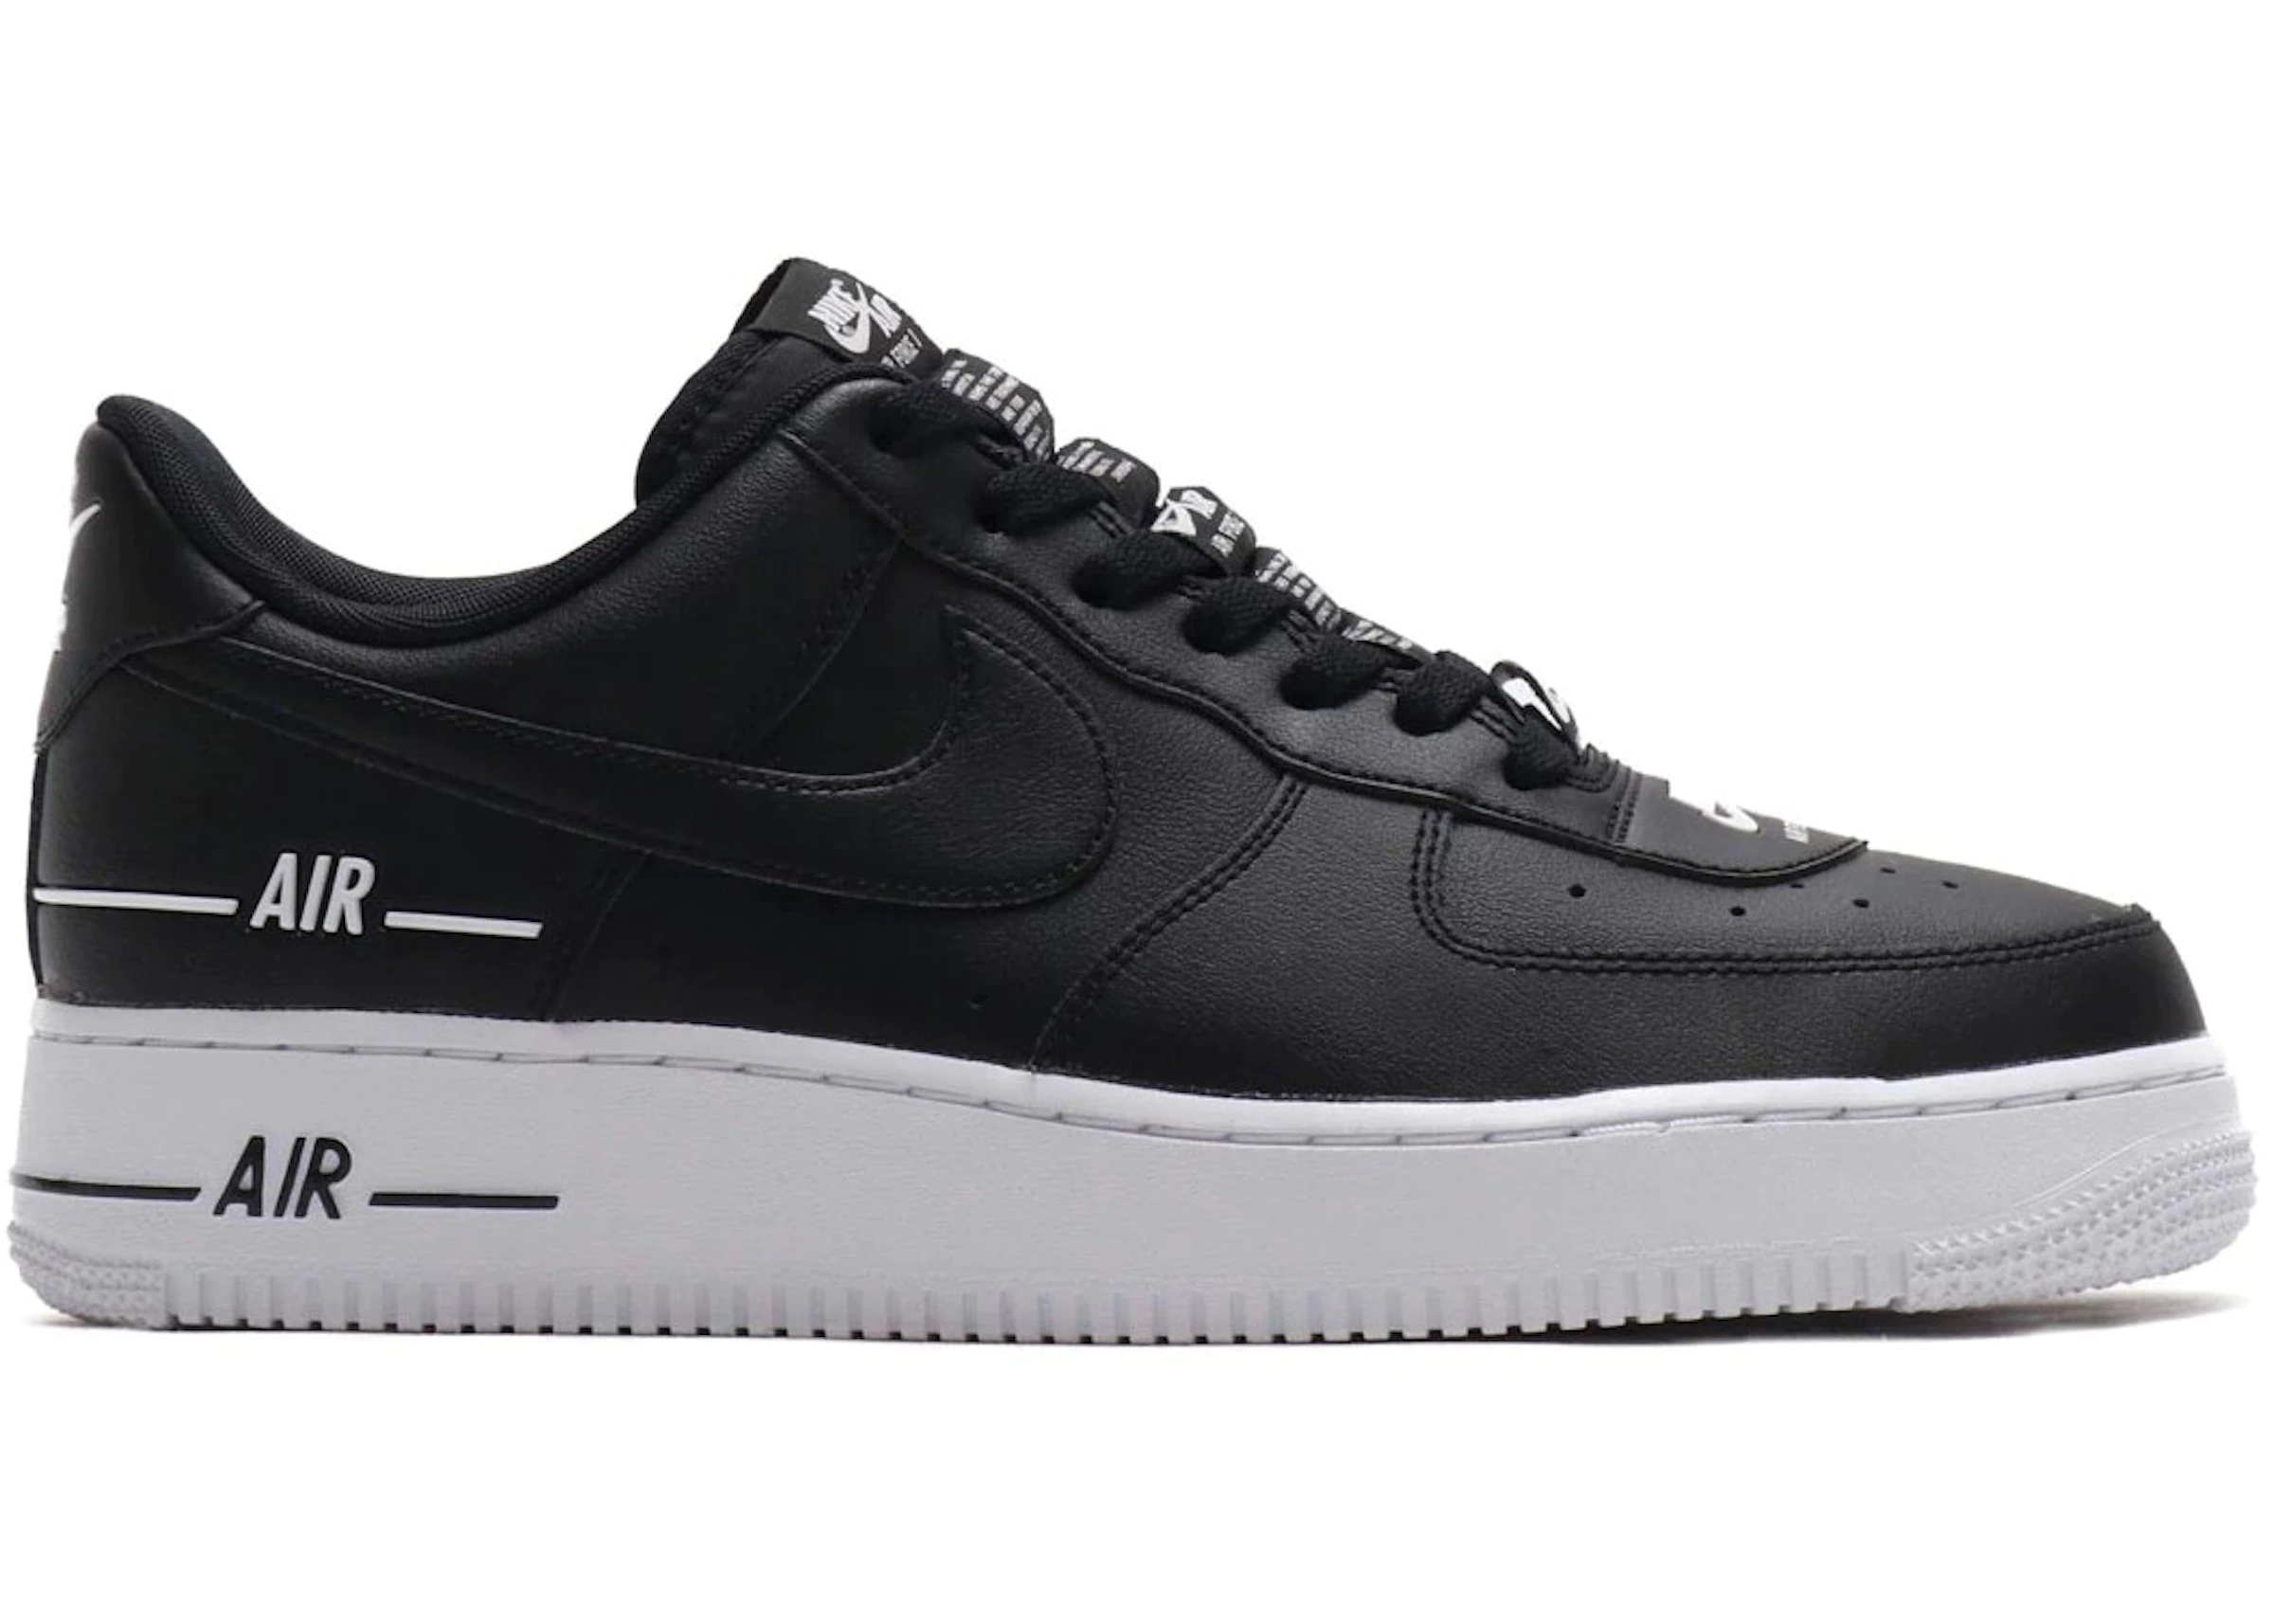 Ie Wrinkles Confession ナイキ エアフォース1 07 LV8 3 "ブラック/ホワイト" Nike Air Force 1 Low "Double Air Low Black  White" - CJ1379-001 - JP